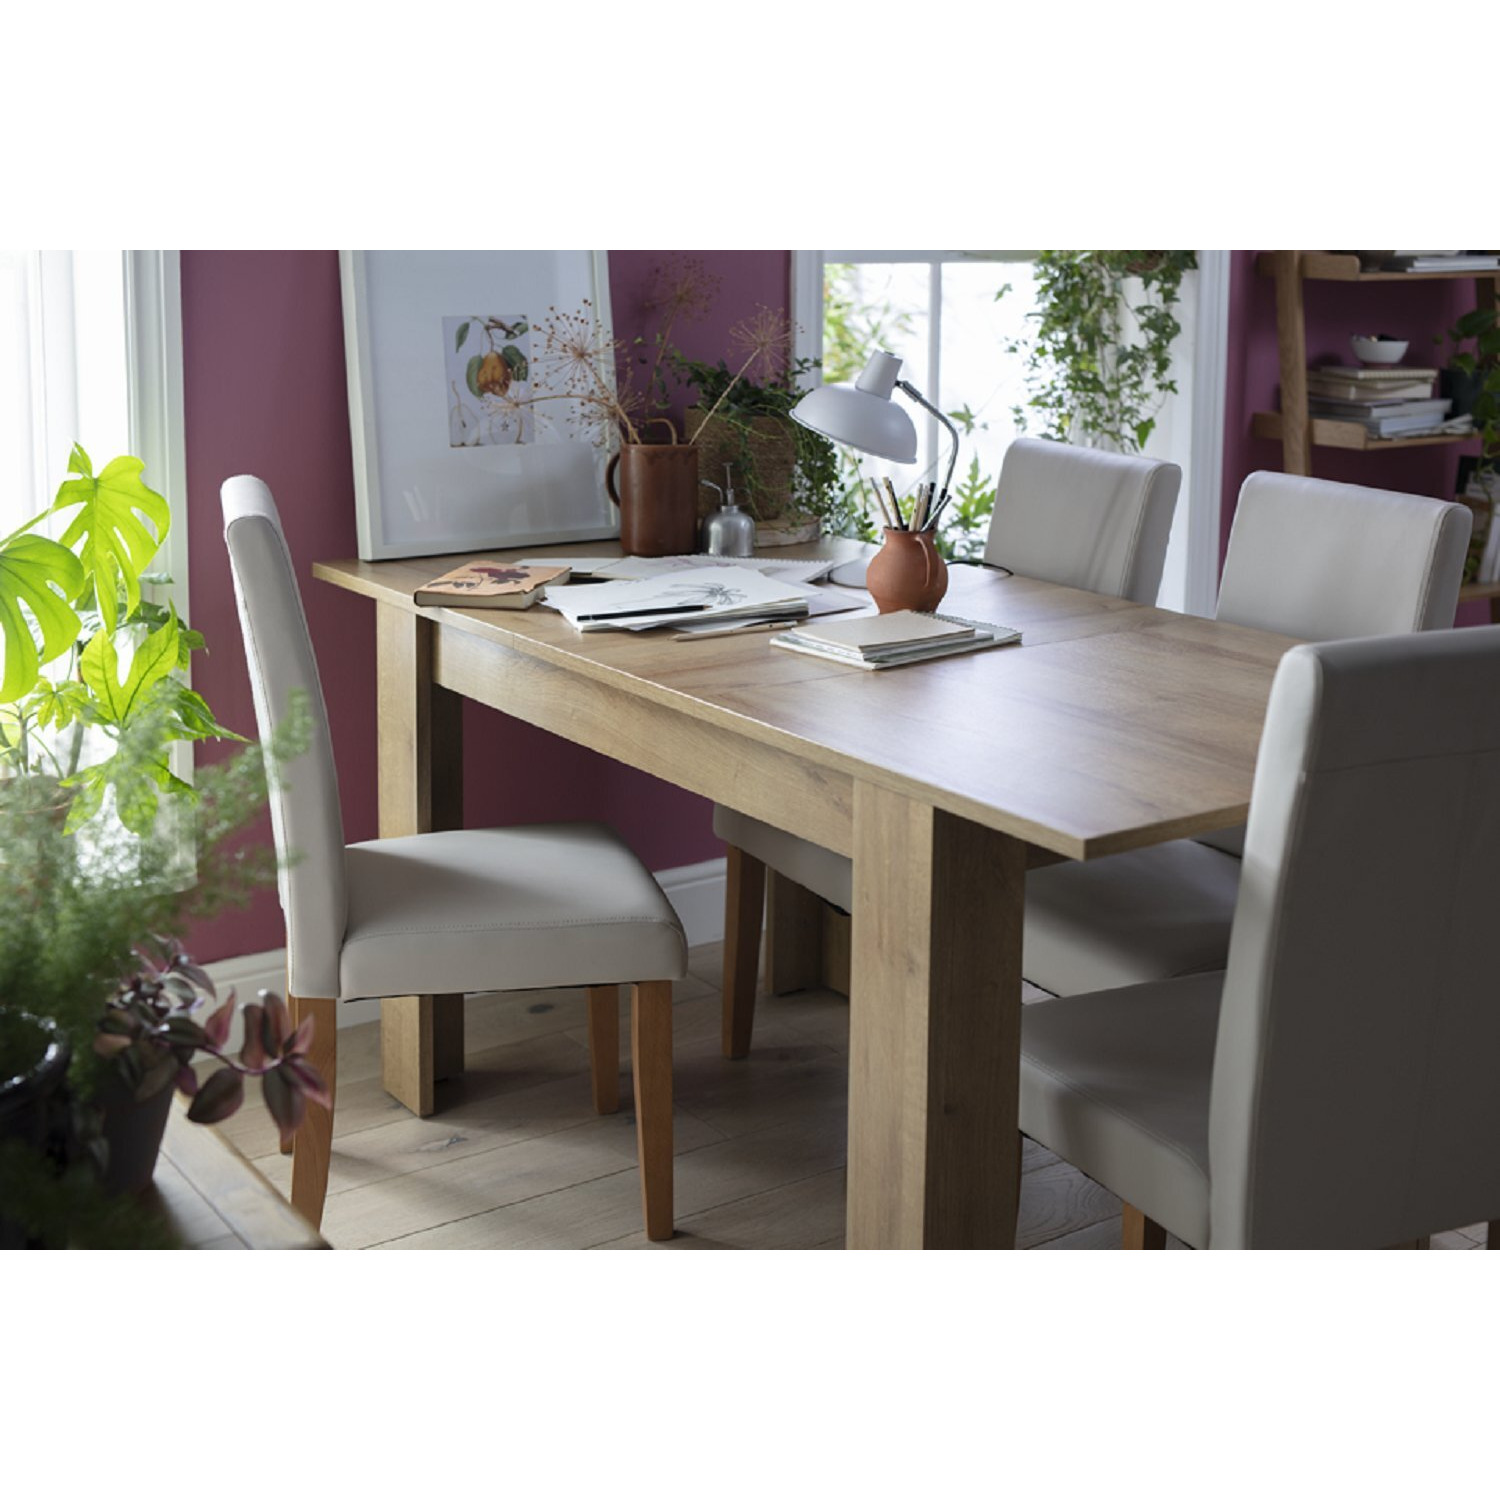 Argos Home Miami Extending Table & 4 Charcoal Chairs - image 1